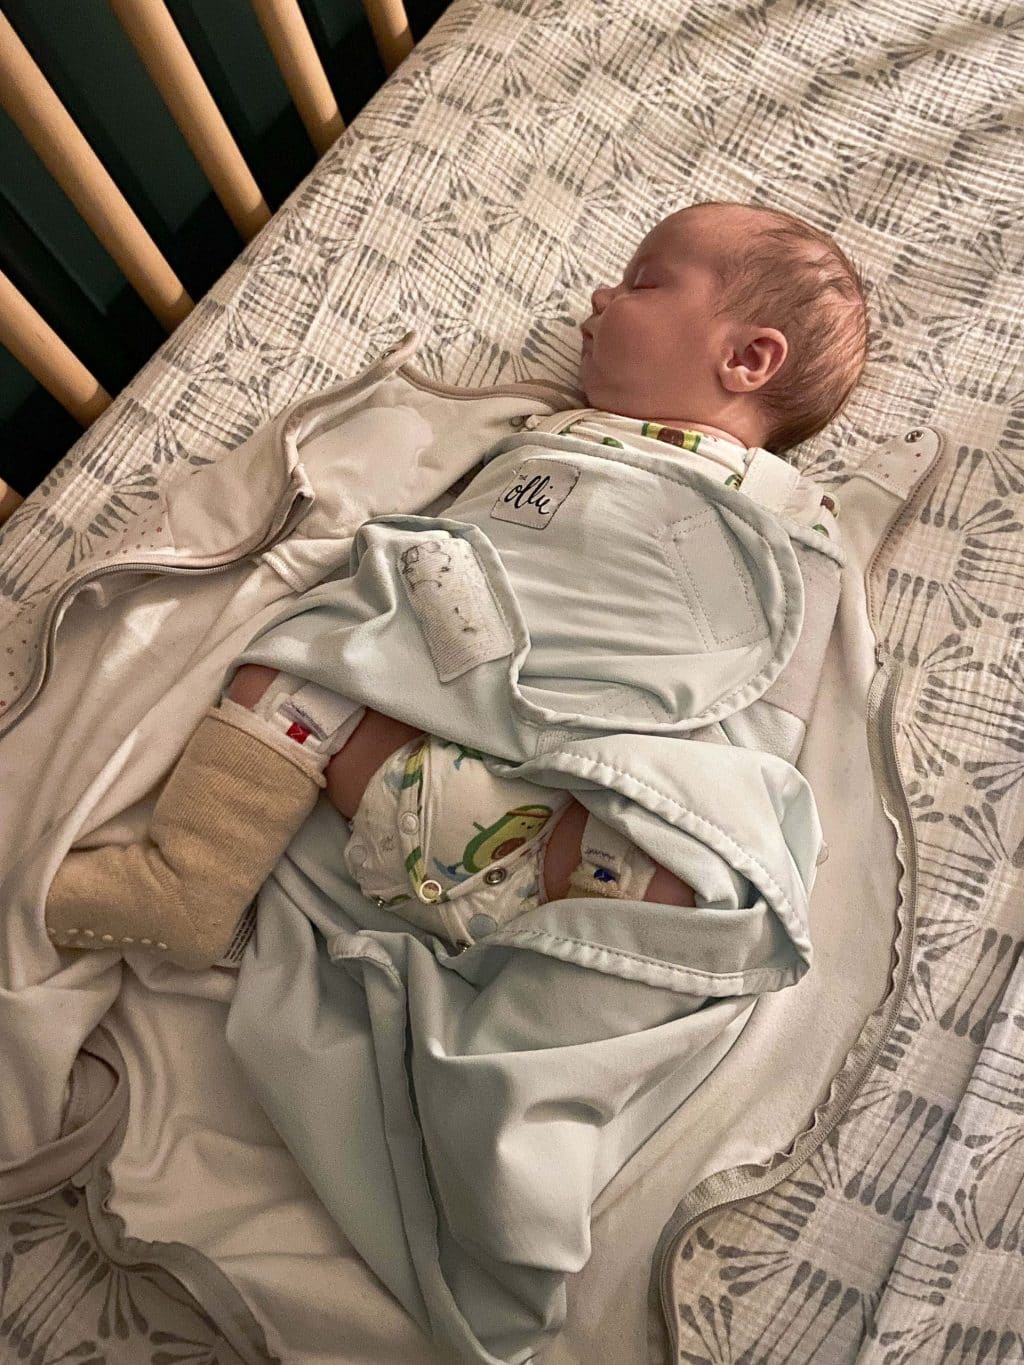 Figuring out the best solution for swaddling with hip dysplasia